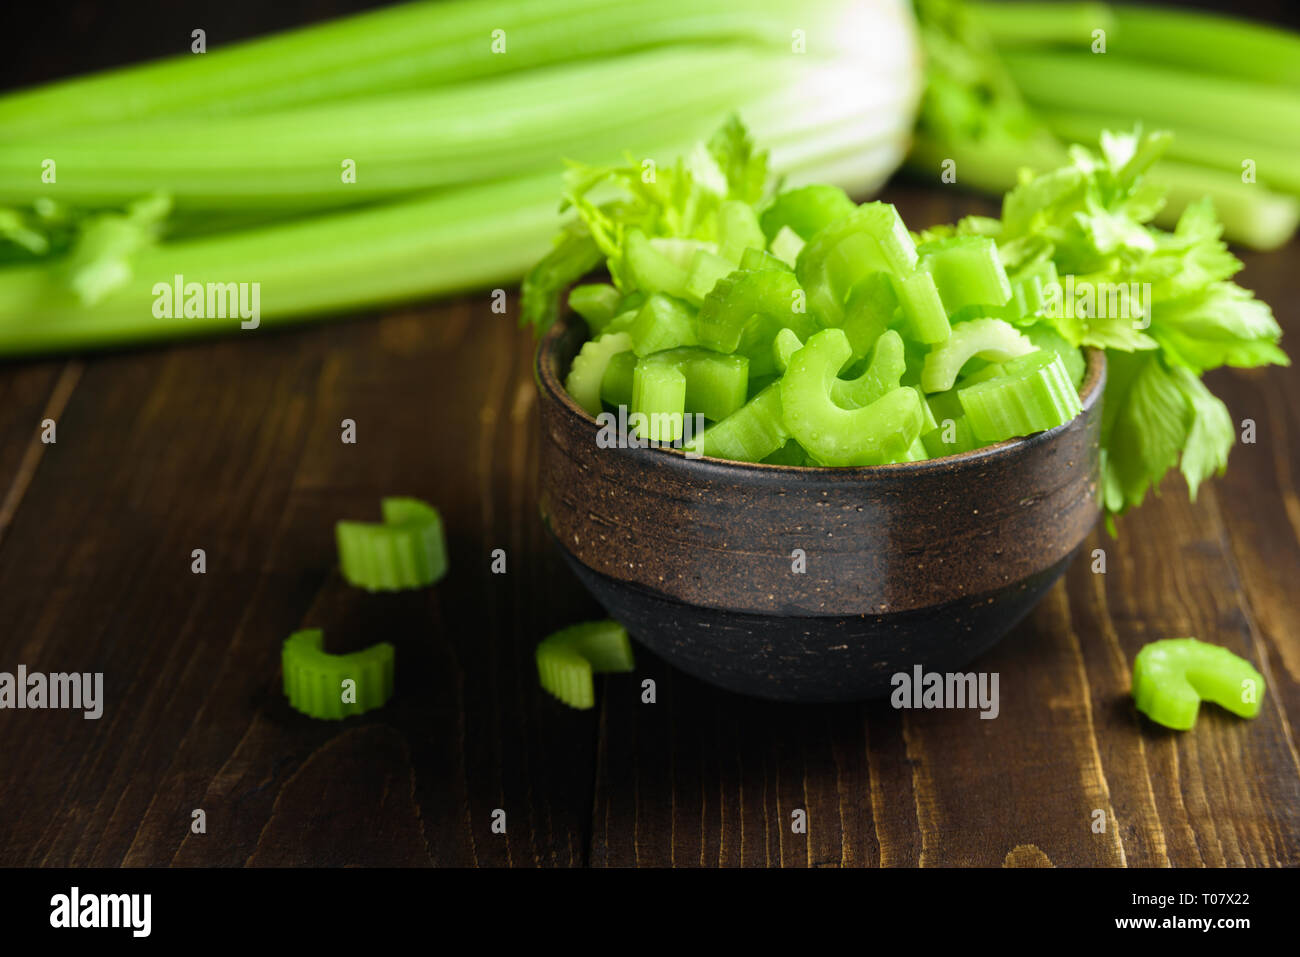 Cutted celery sticks in ceramic bowl on wooden background Stock Photo